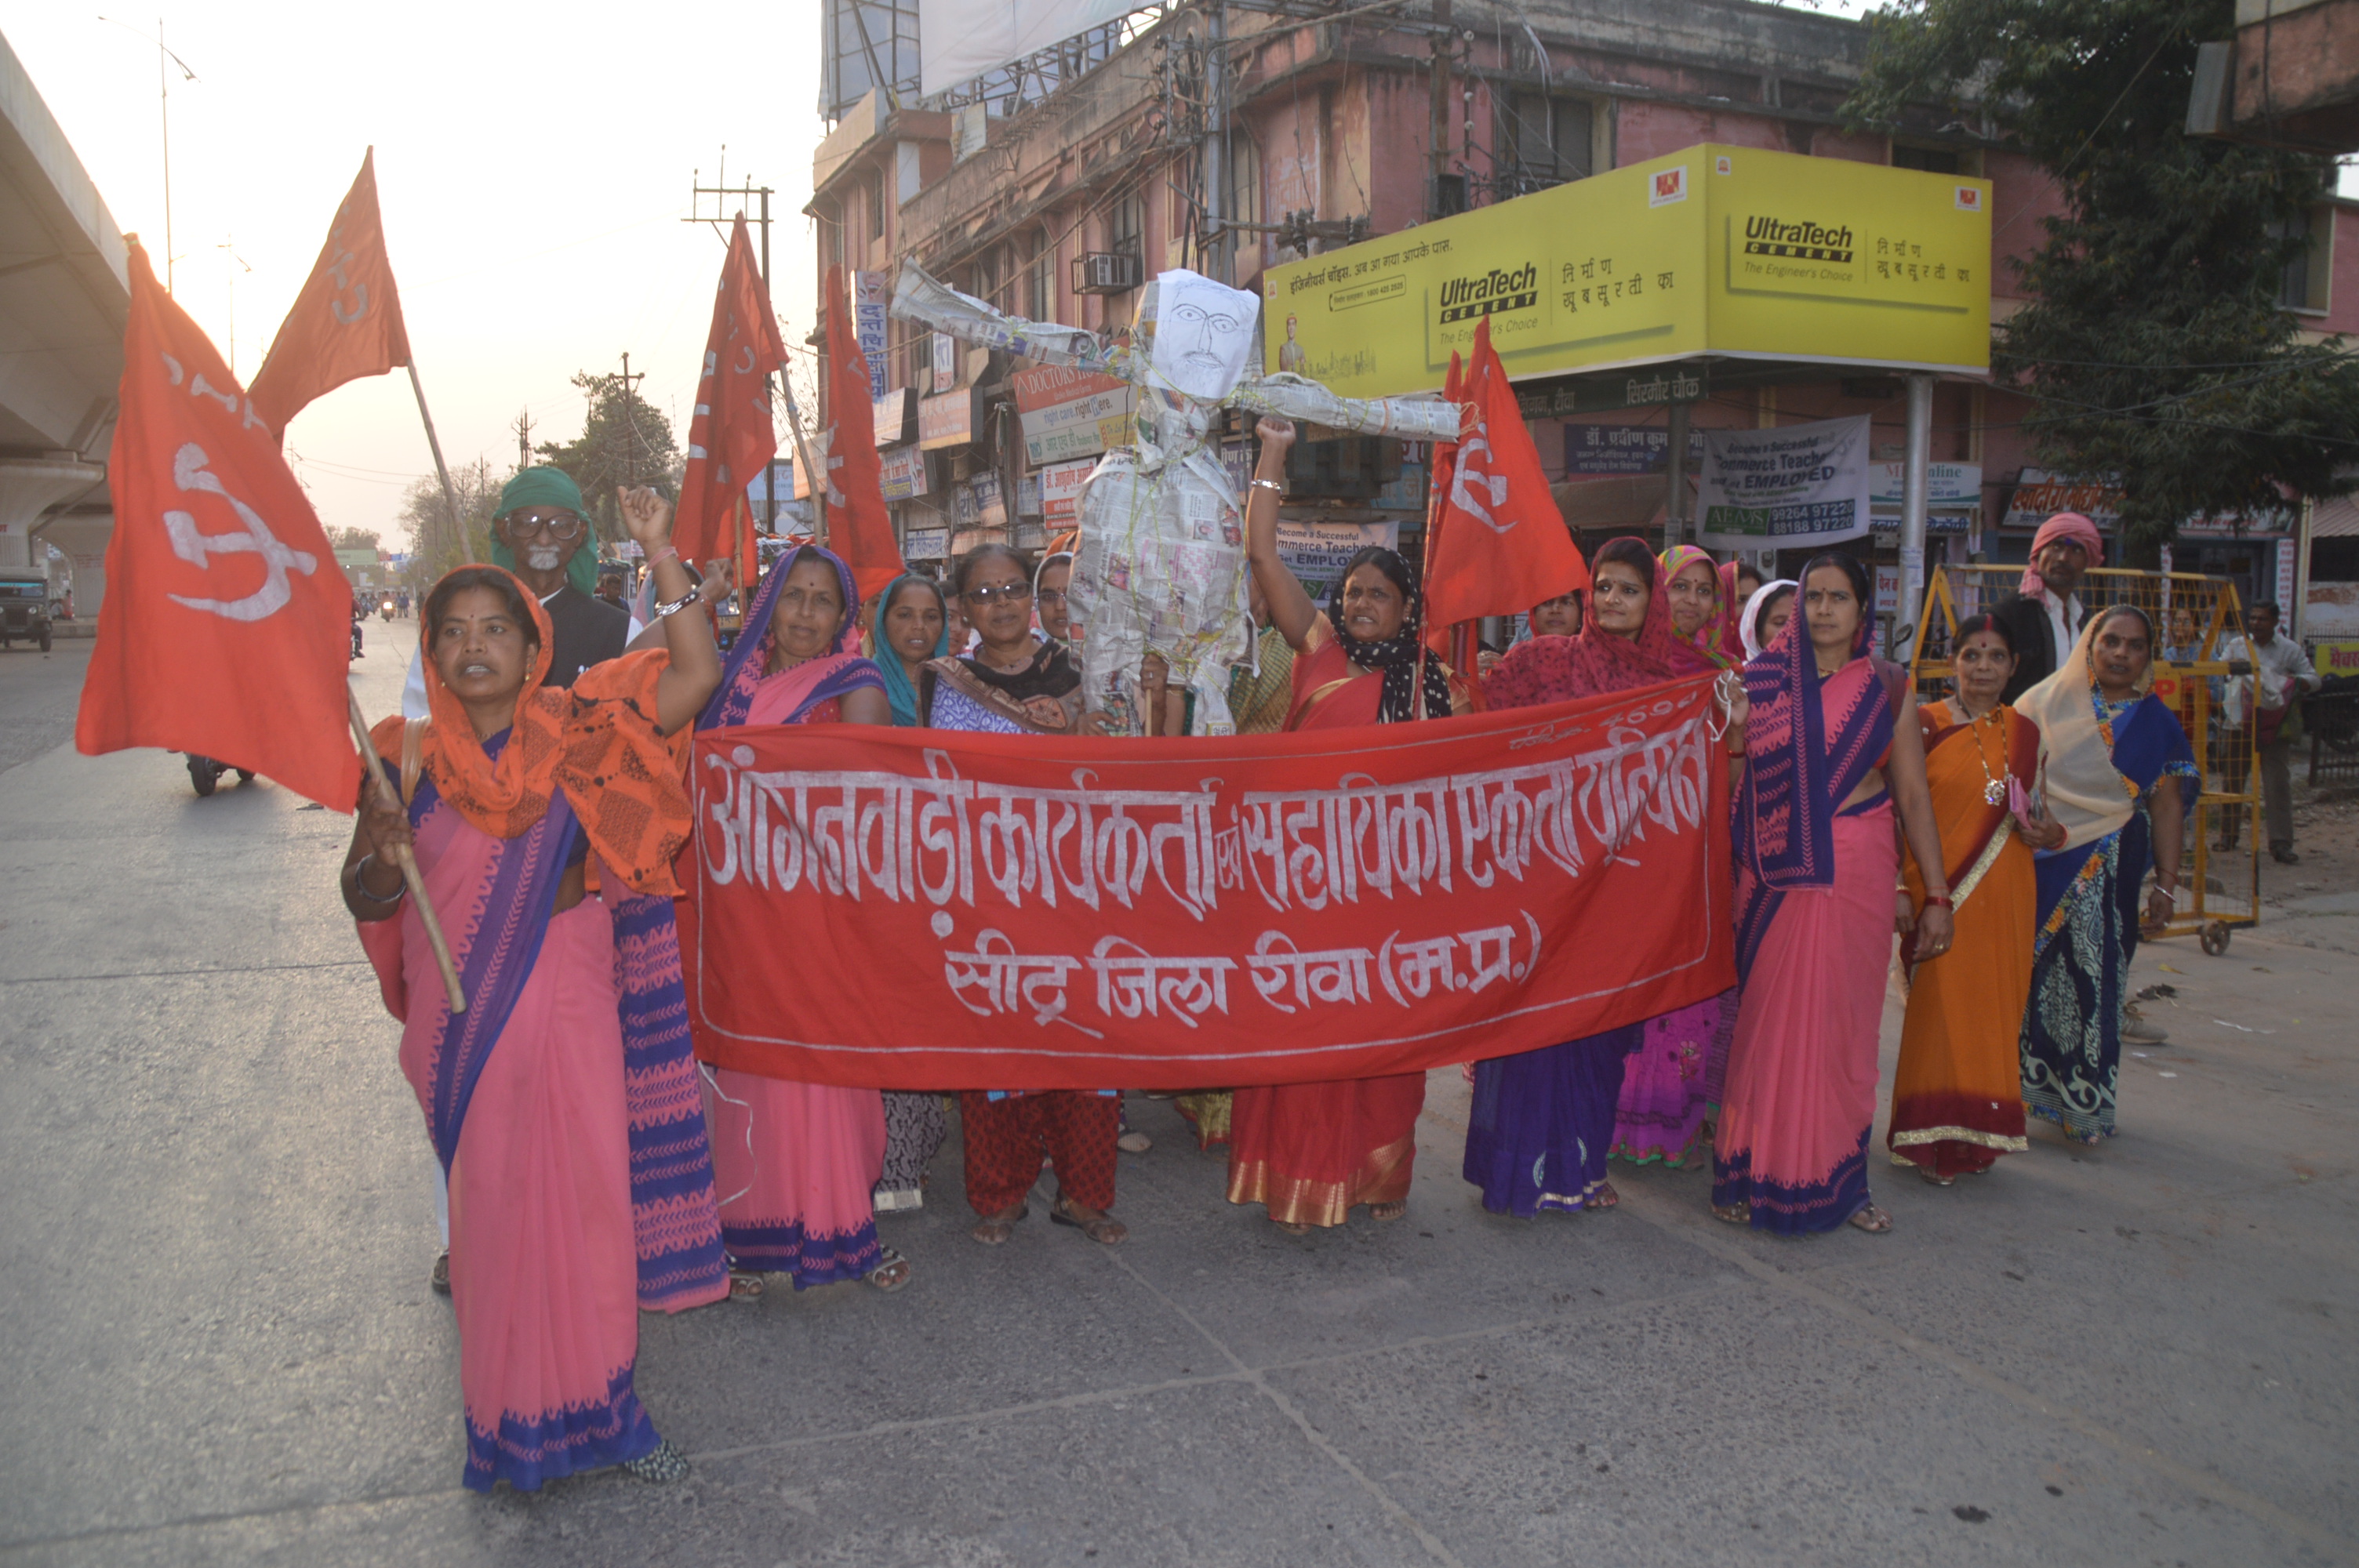 Women in the Women's Day protesting against the Chief Minister